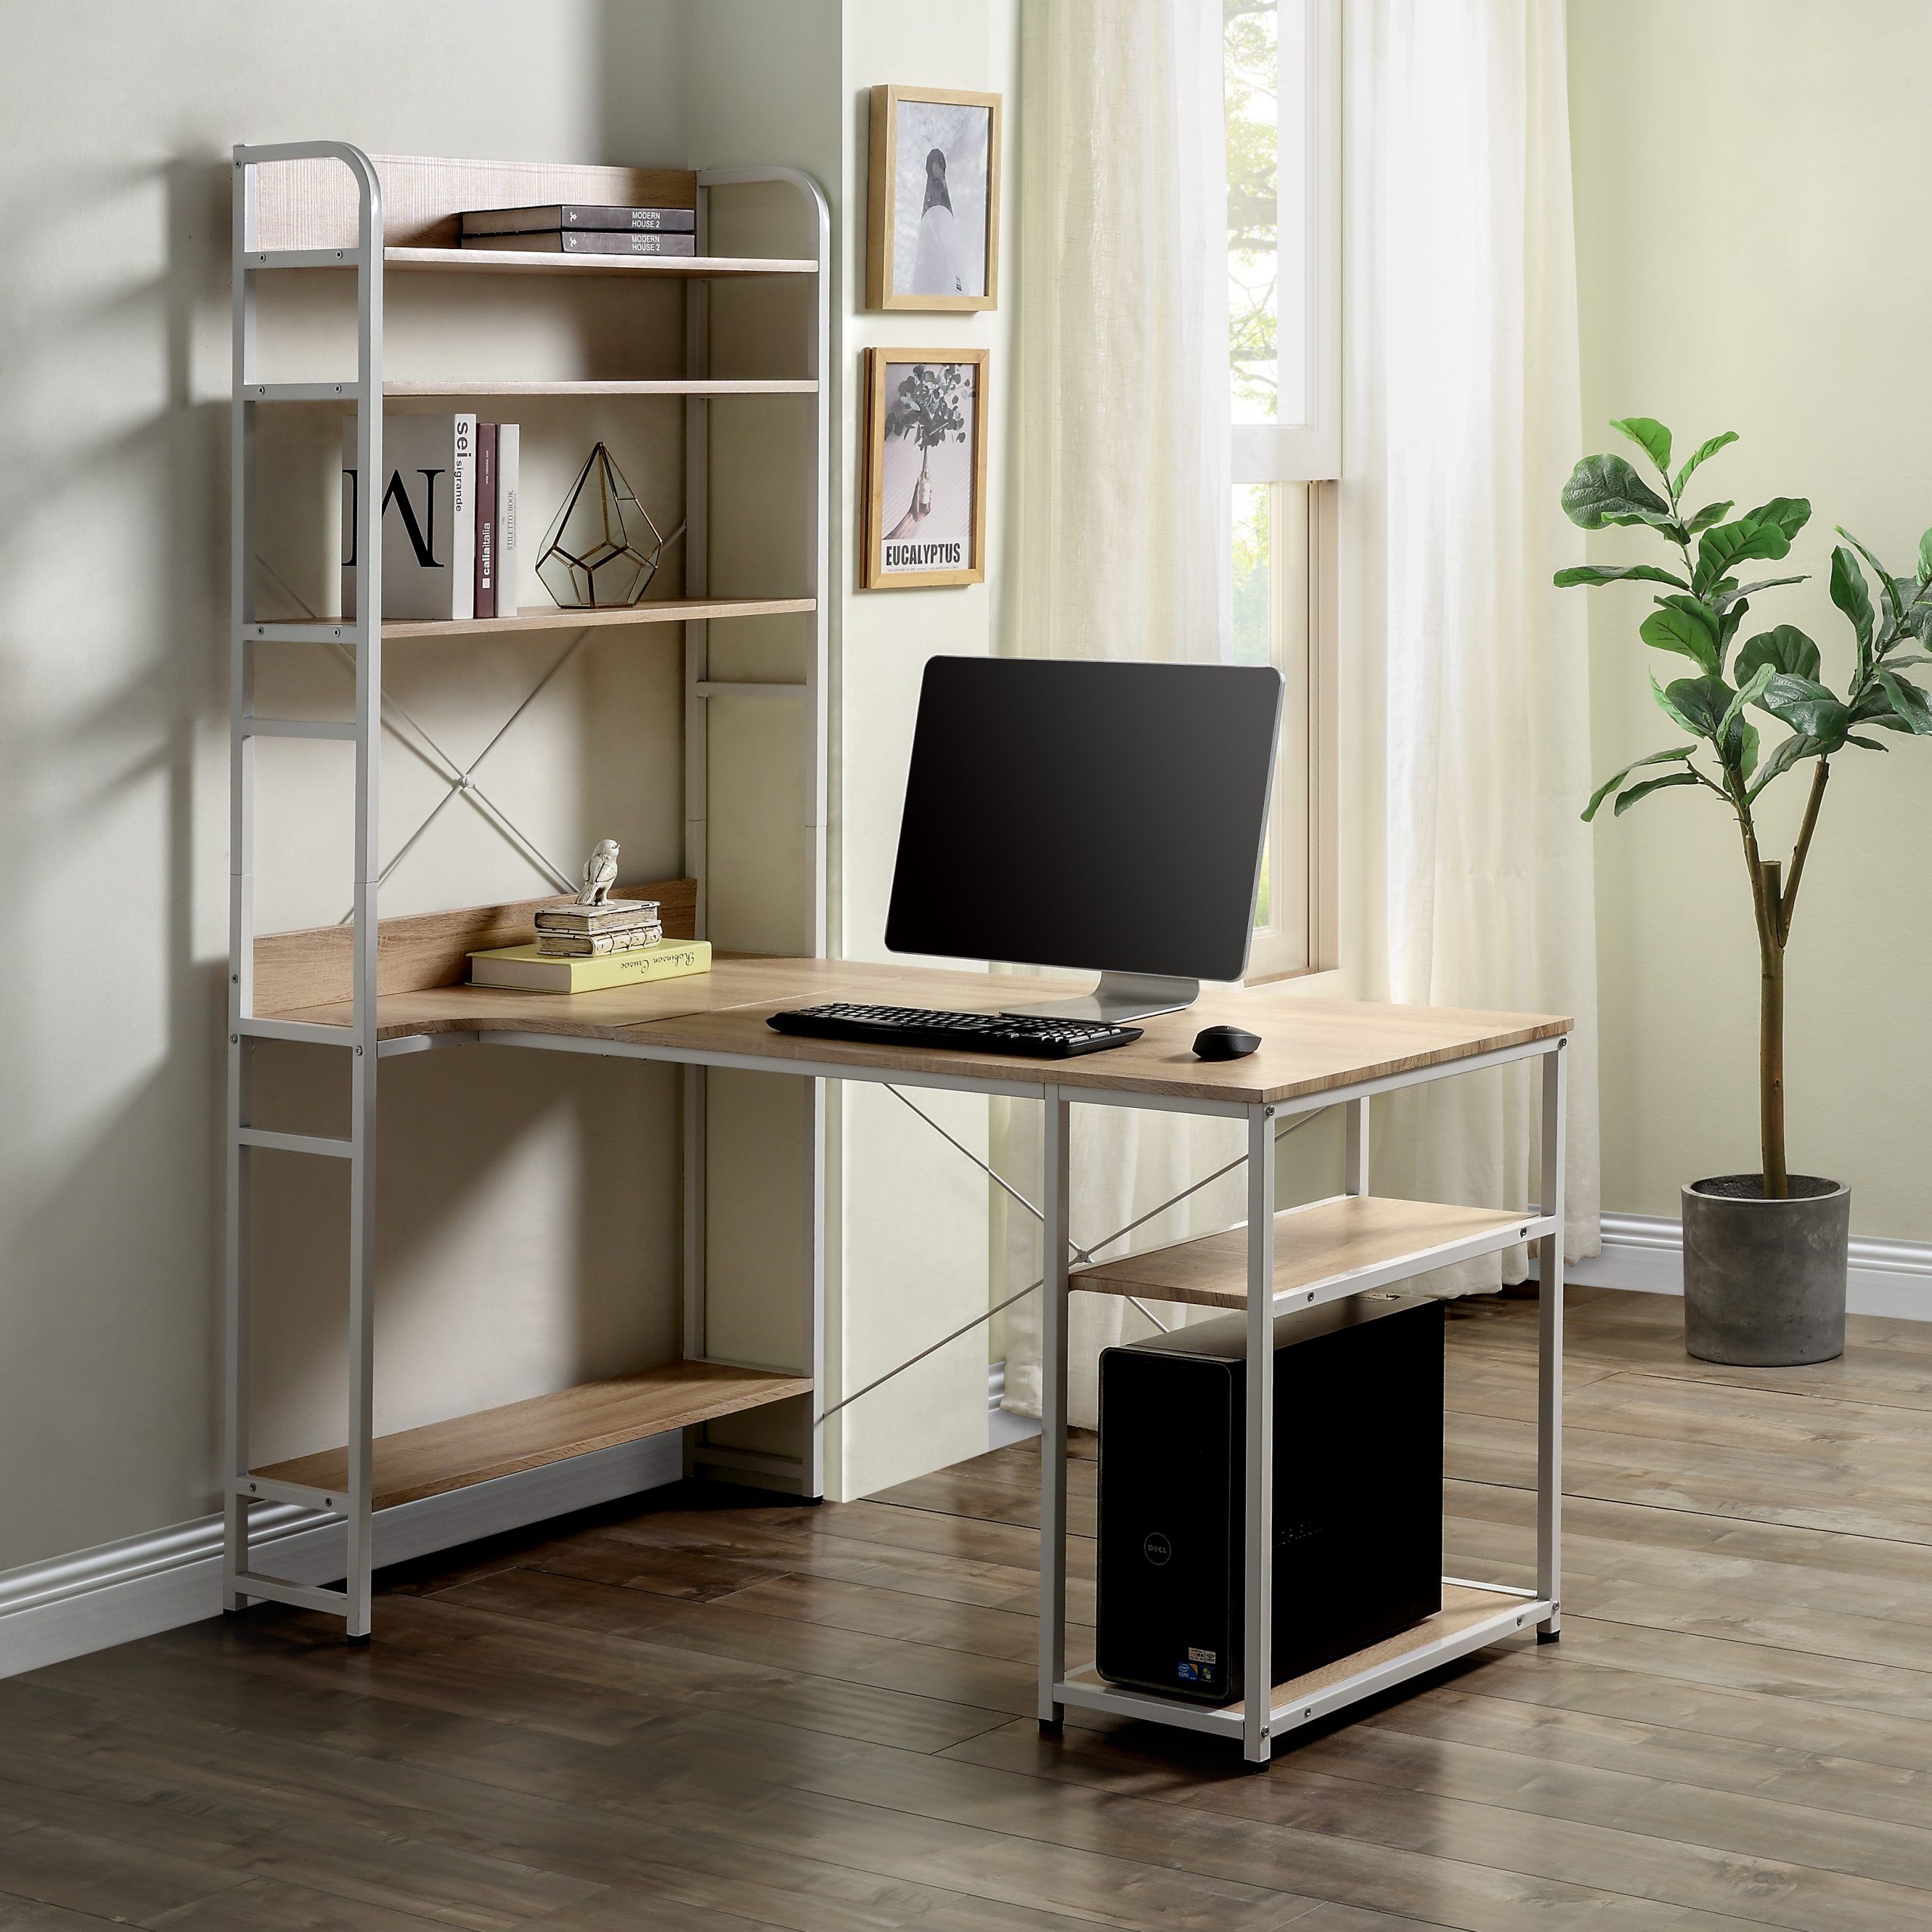 Yofe Home Office Desk With Storage, Modern Computer Desk W/ 5 Tier Intended For Executive Desks With Dual Storage (View 4 of 15)